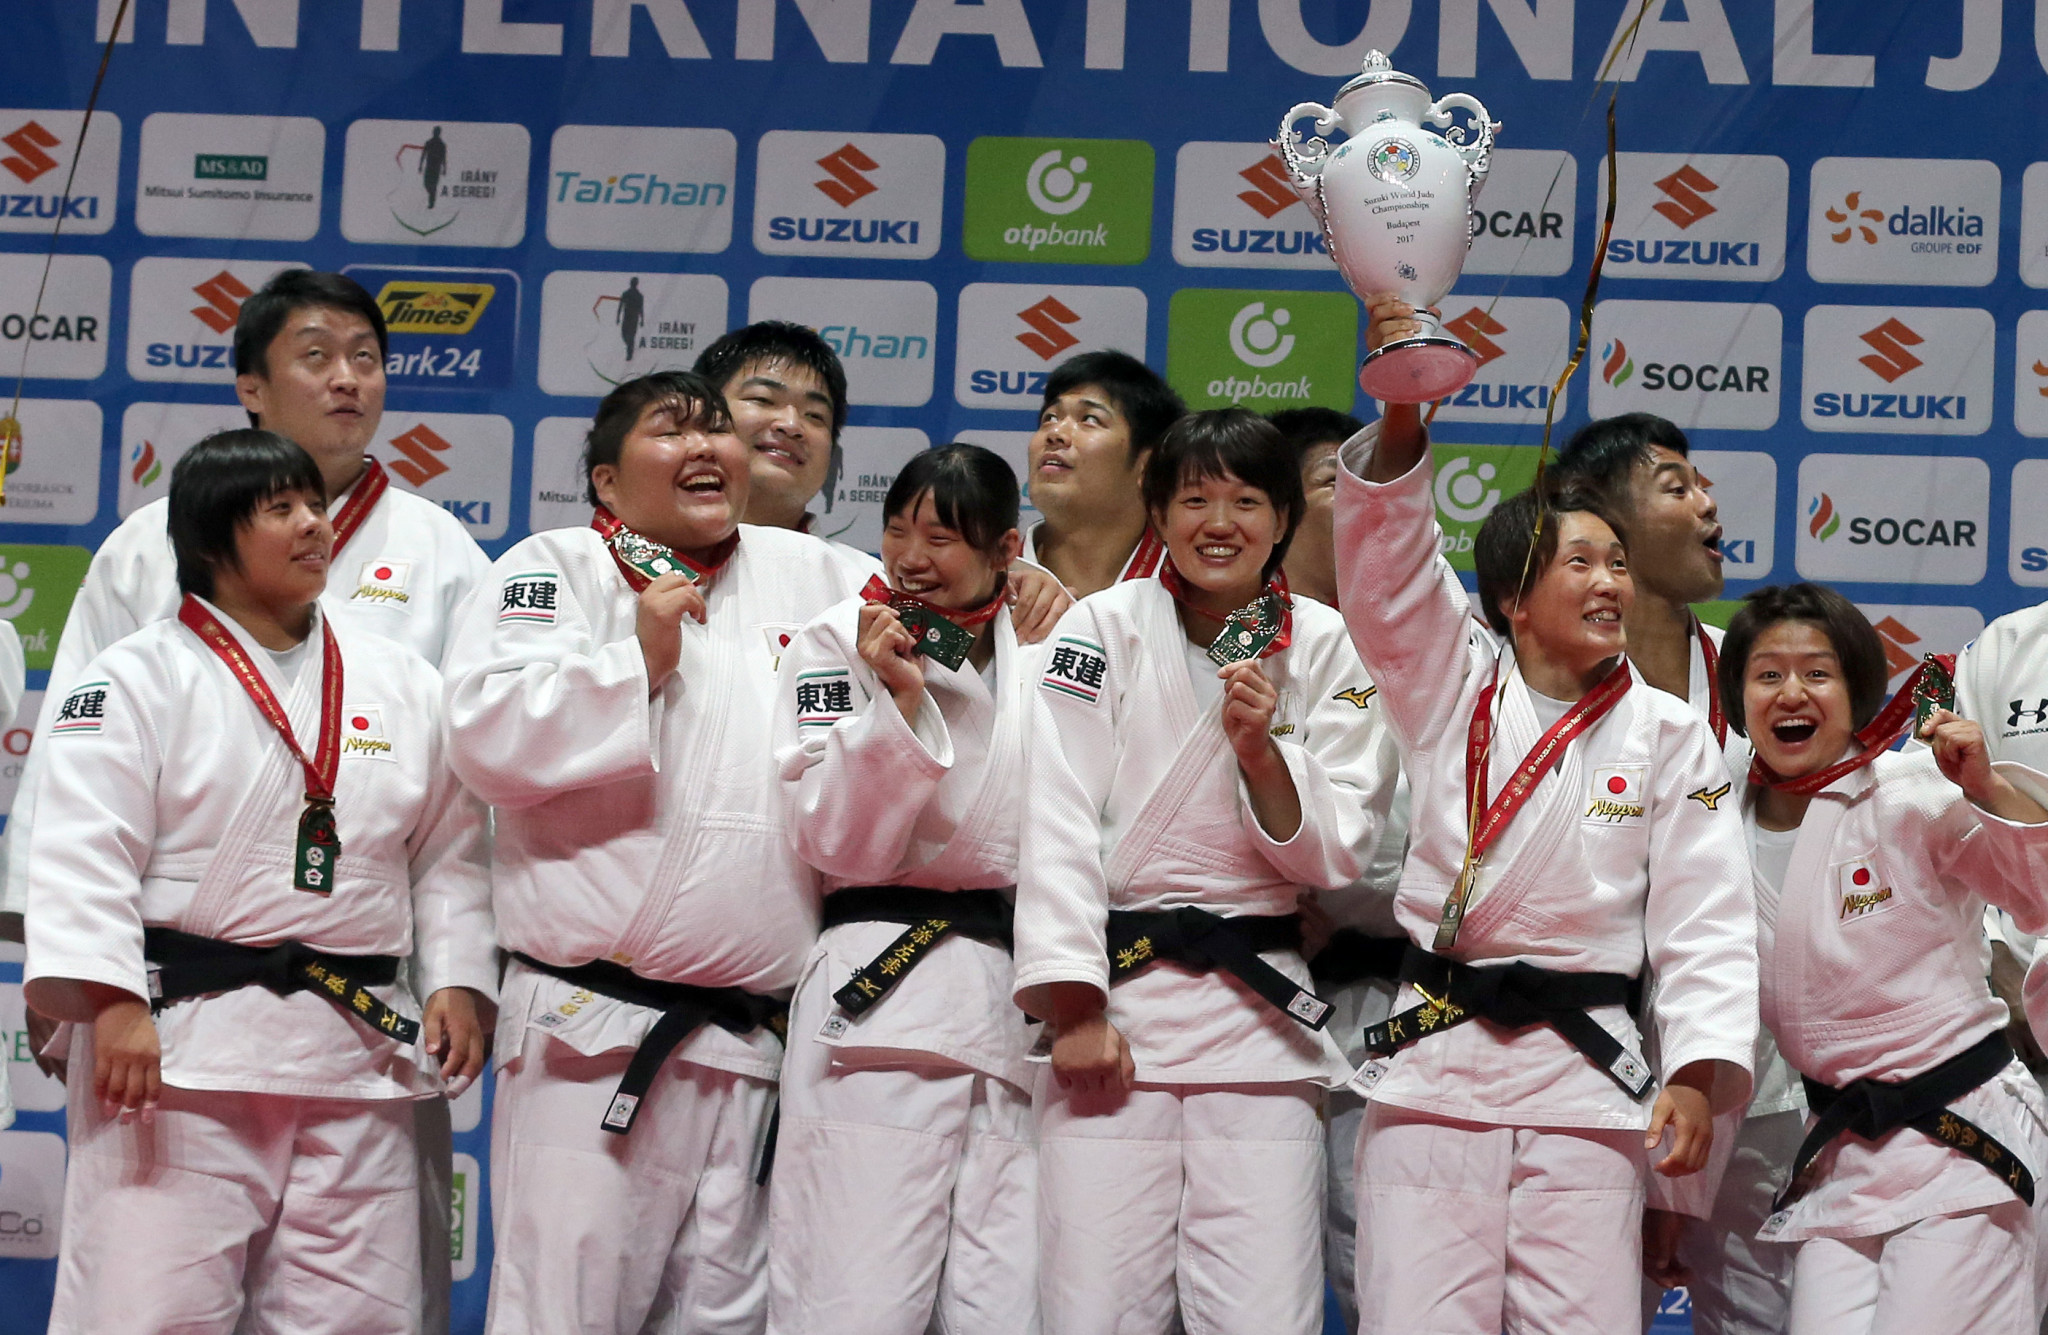 Japan win first mixed team title at IJF World Championships